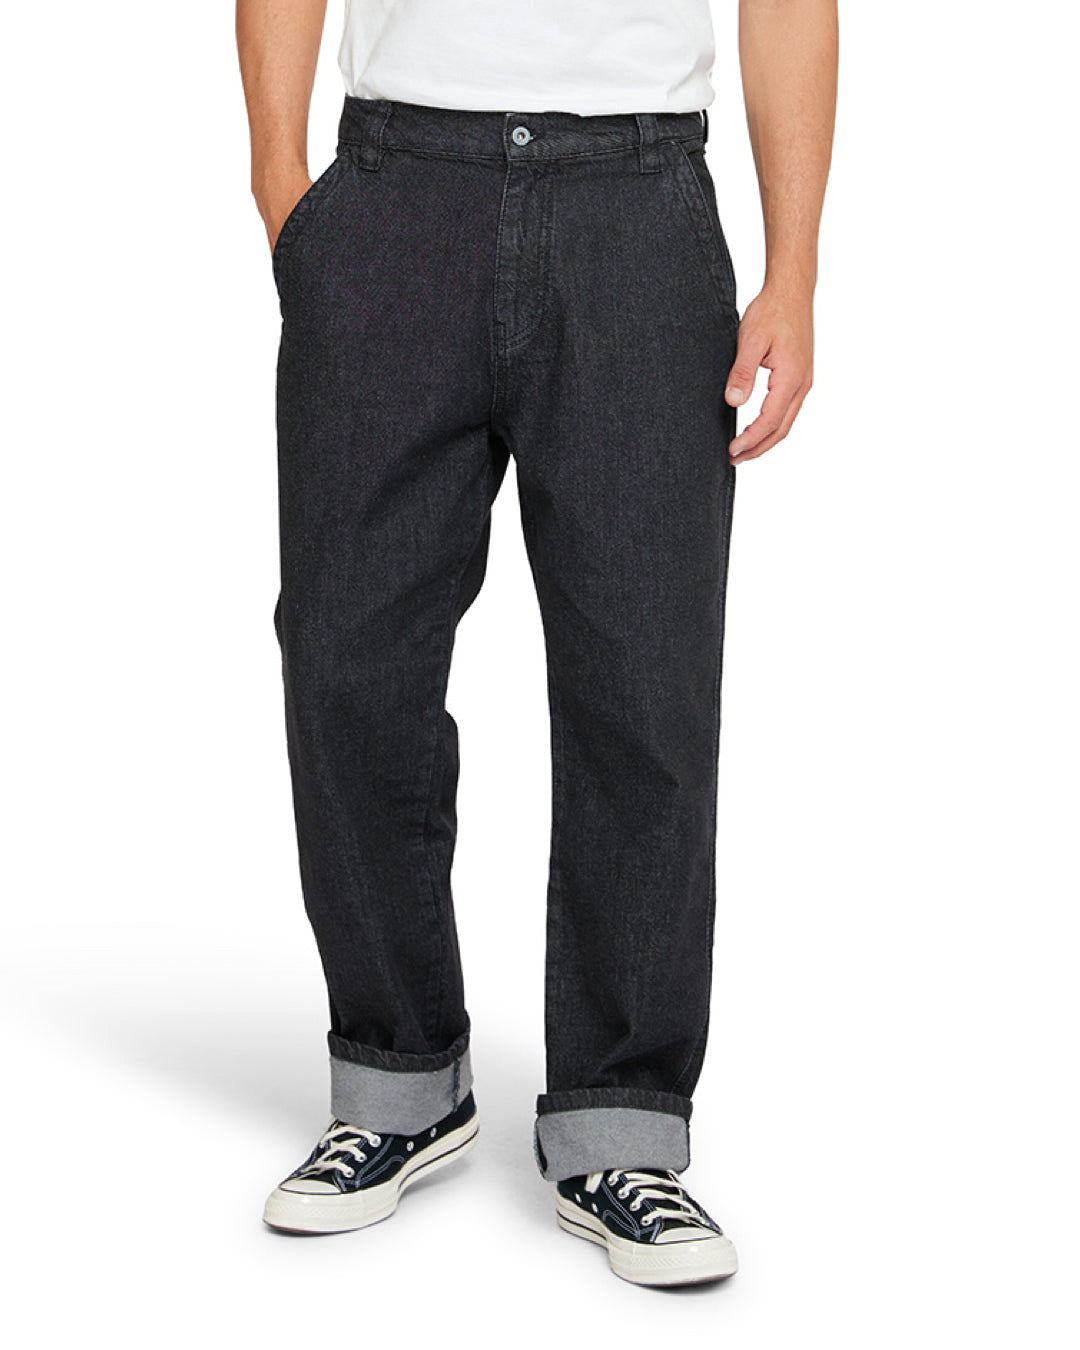 Cut Resistant Technology jean trousers for small slicing tools